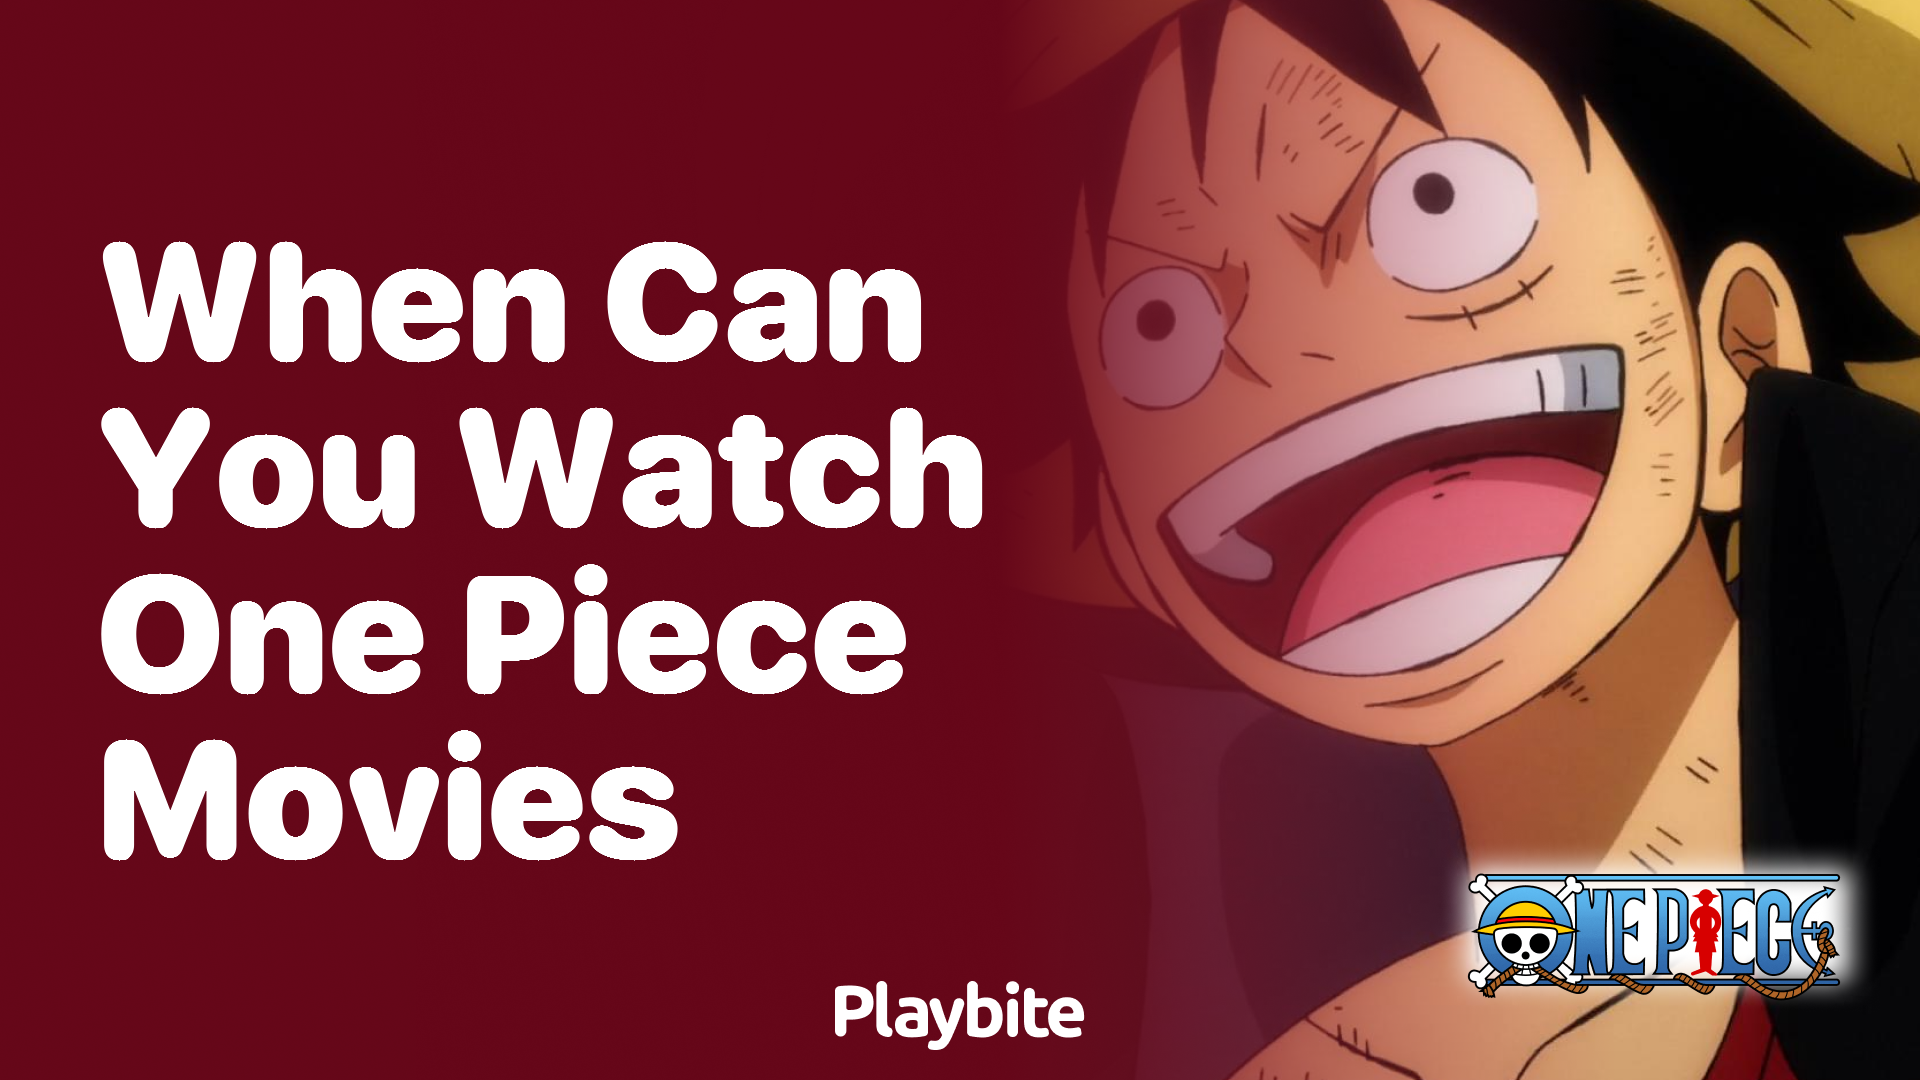 When can you watch One Piece movies?